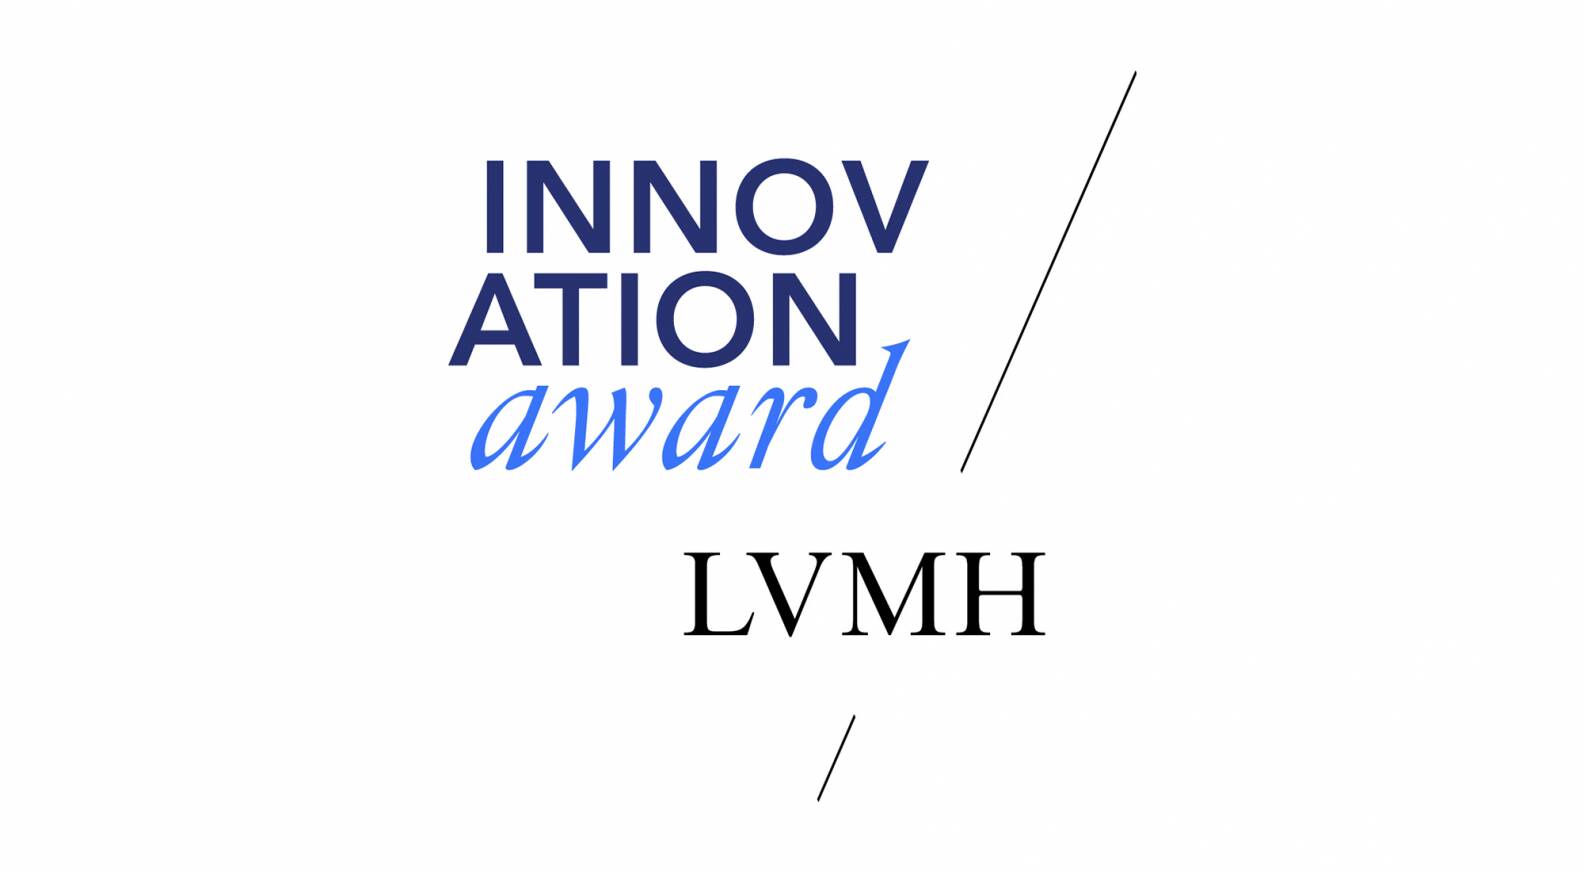 Viva Technology 2017: pitches by startups competing for LVMH Innovation  Award - LVMH